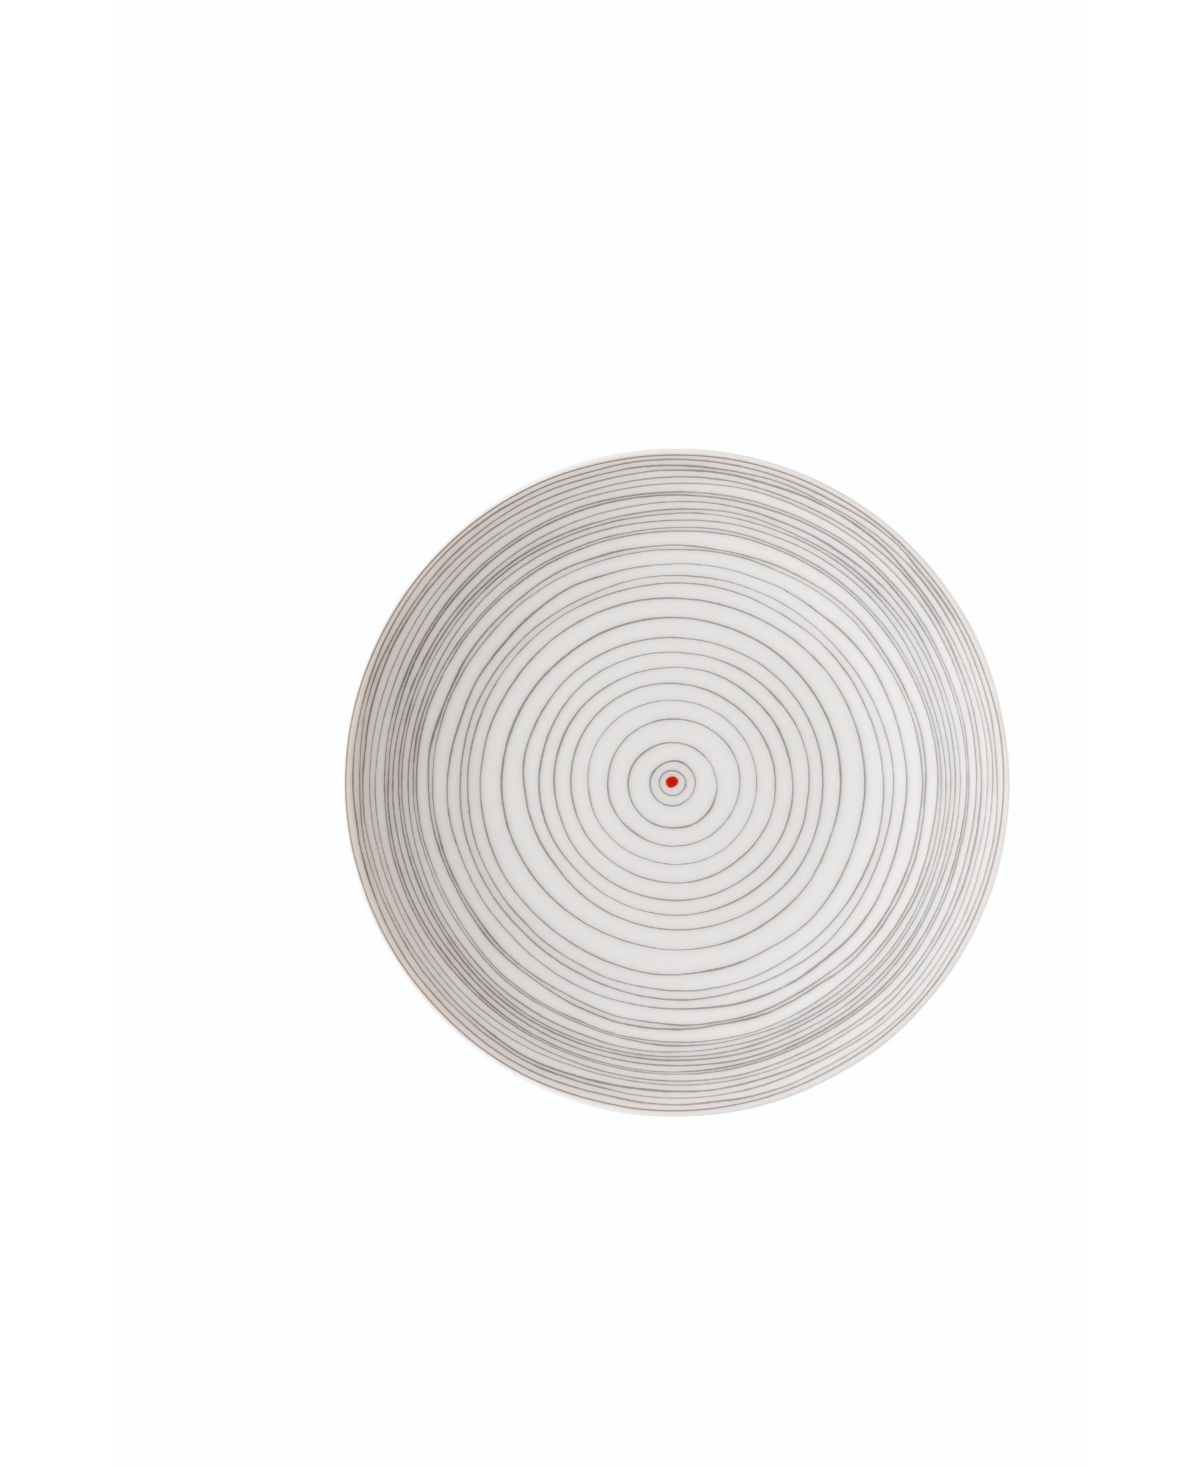 "Tac 02" Stripes Bread & Butter Plate - White